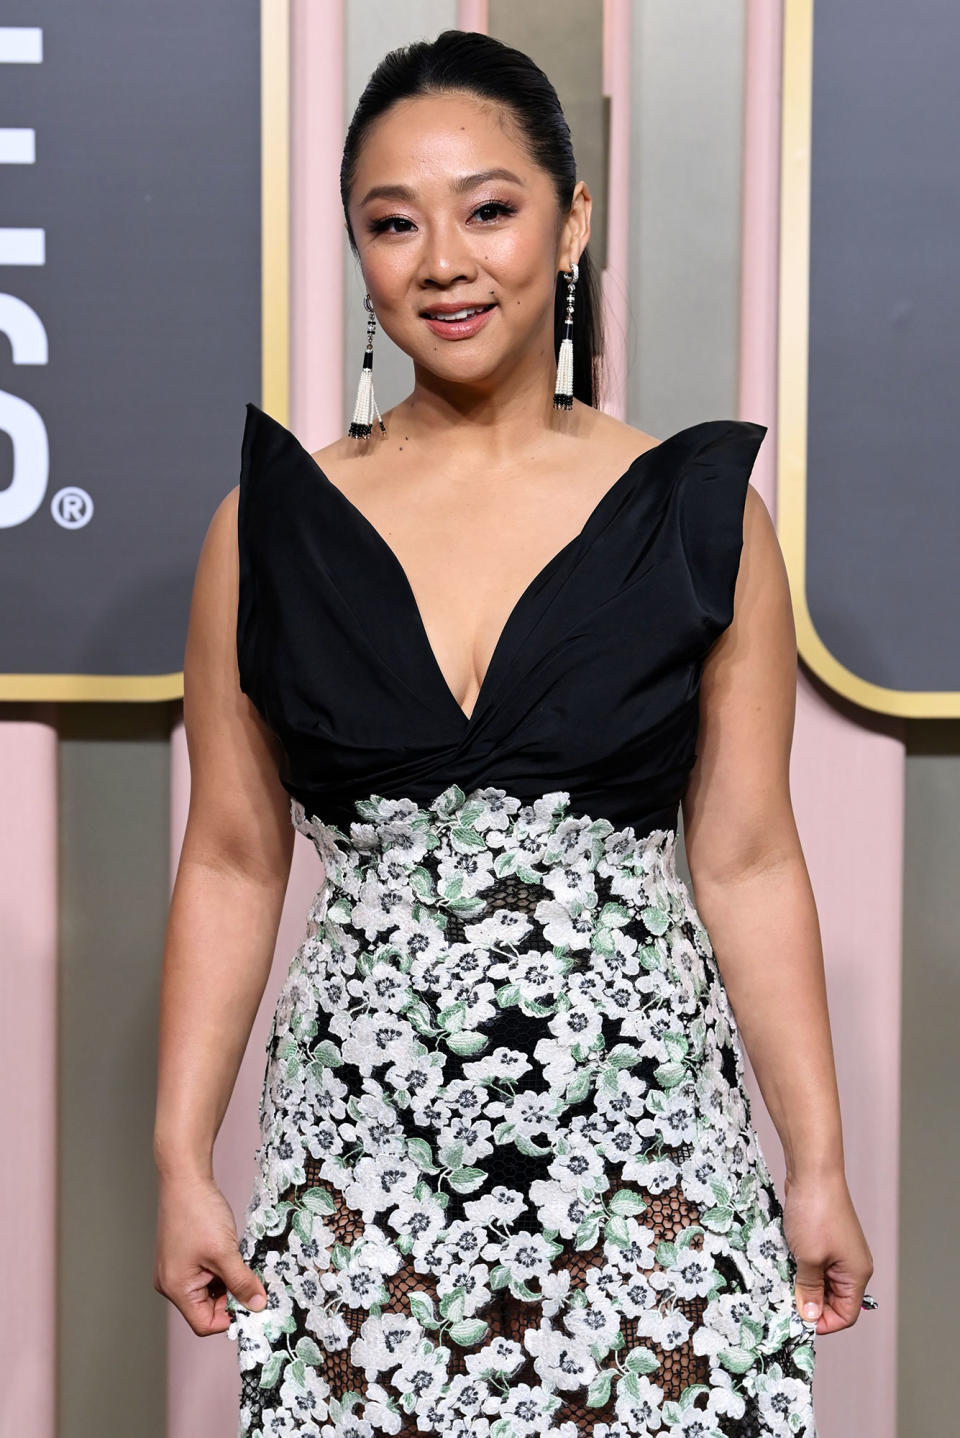 "One of the things I'm most proud of is that it's shaking up the movie industry," Hsu told The Wrap of the buzz-worthy film. She added that it was "very healing" to hear from viewers who related to her character's complex relationship with her mother (played by Yeoh). "I did not grow up talking about intergenerational trauma within the immigrant diaspora, but so many people who have similar upbringings are sharing their stories. The beautiful thing about art is that it makes you feel less alone," the Asking for It actress said.